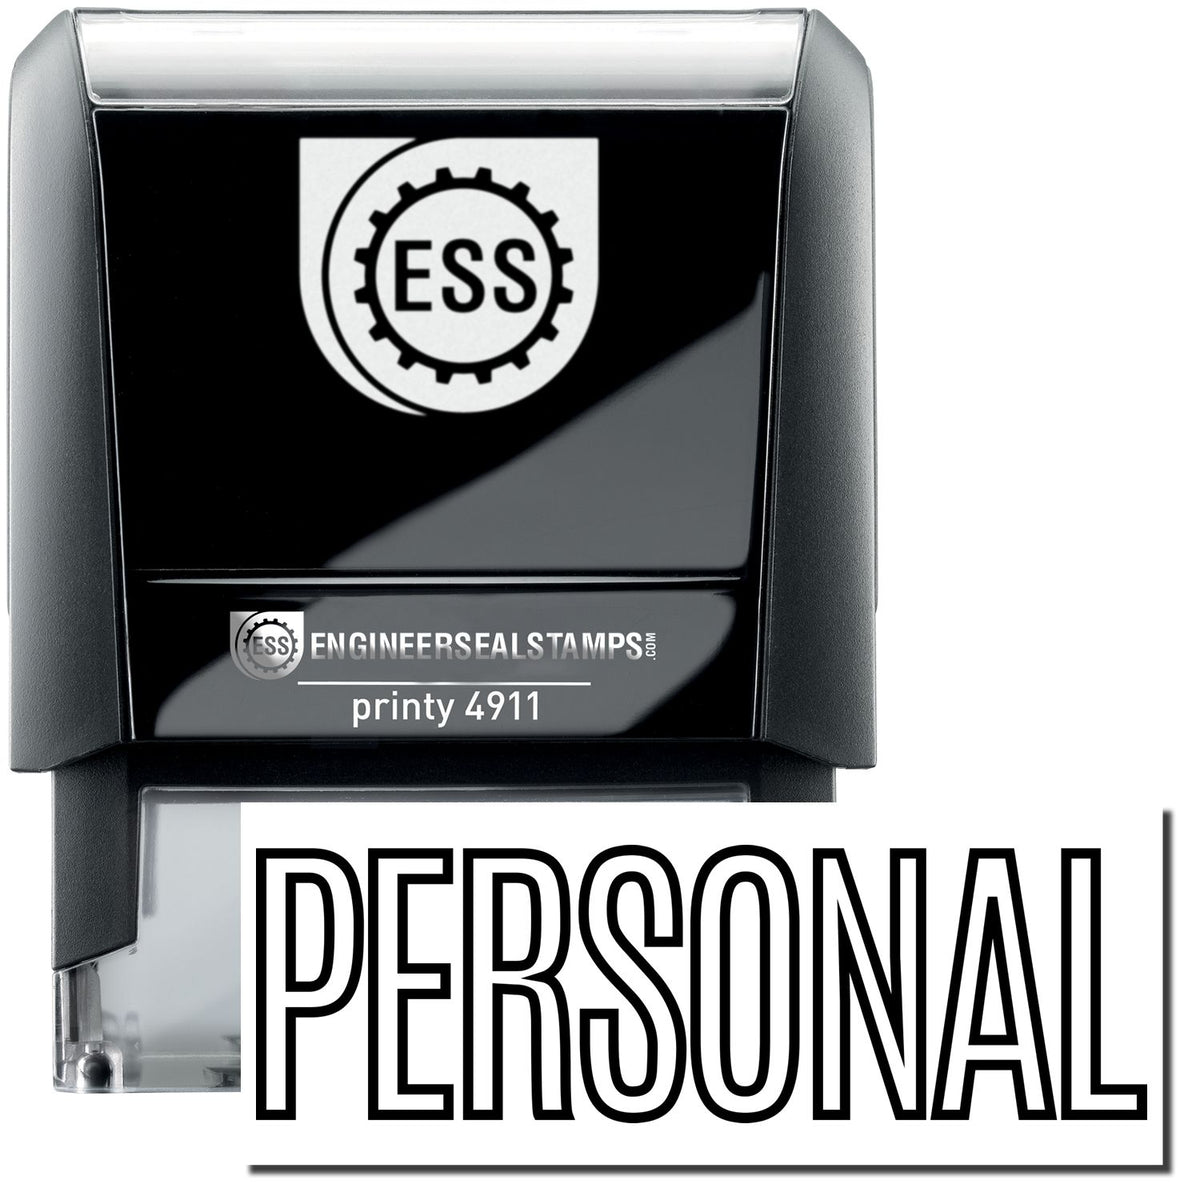 A self-inking stamp with a stamped image showing how the text &quot;PERSONAL&quot; in an outline style is displayed after stamping.